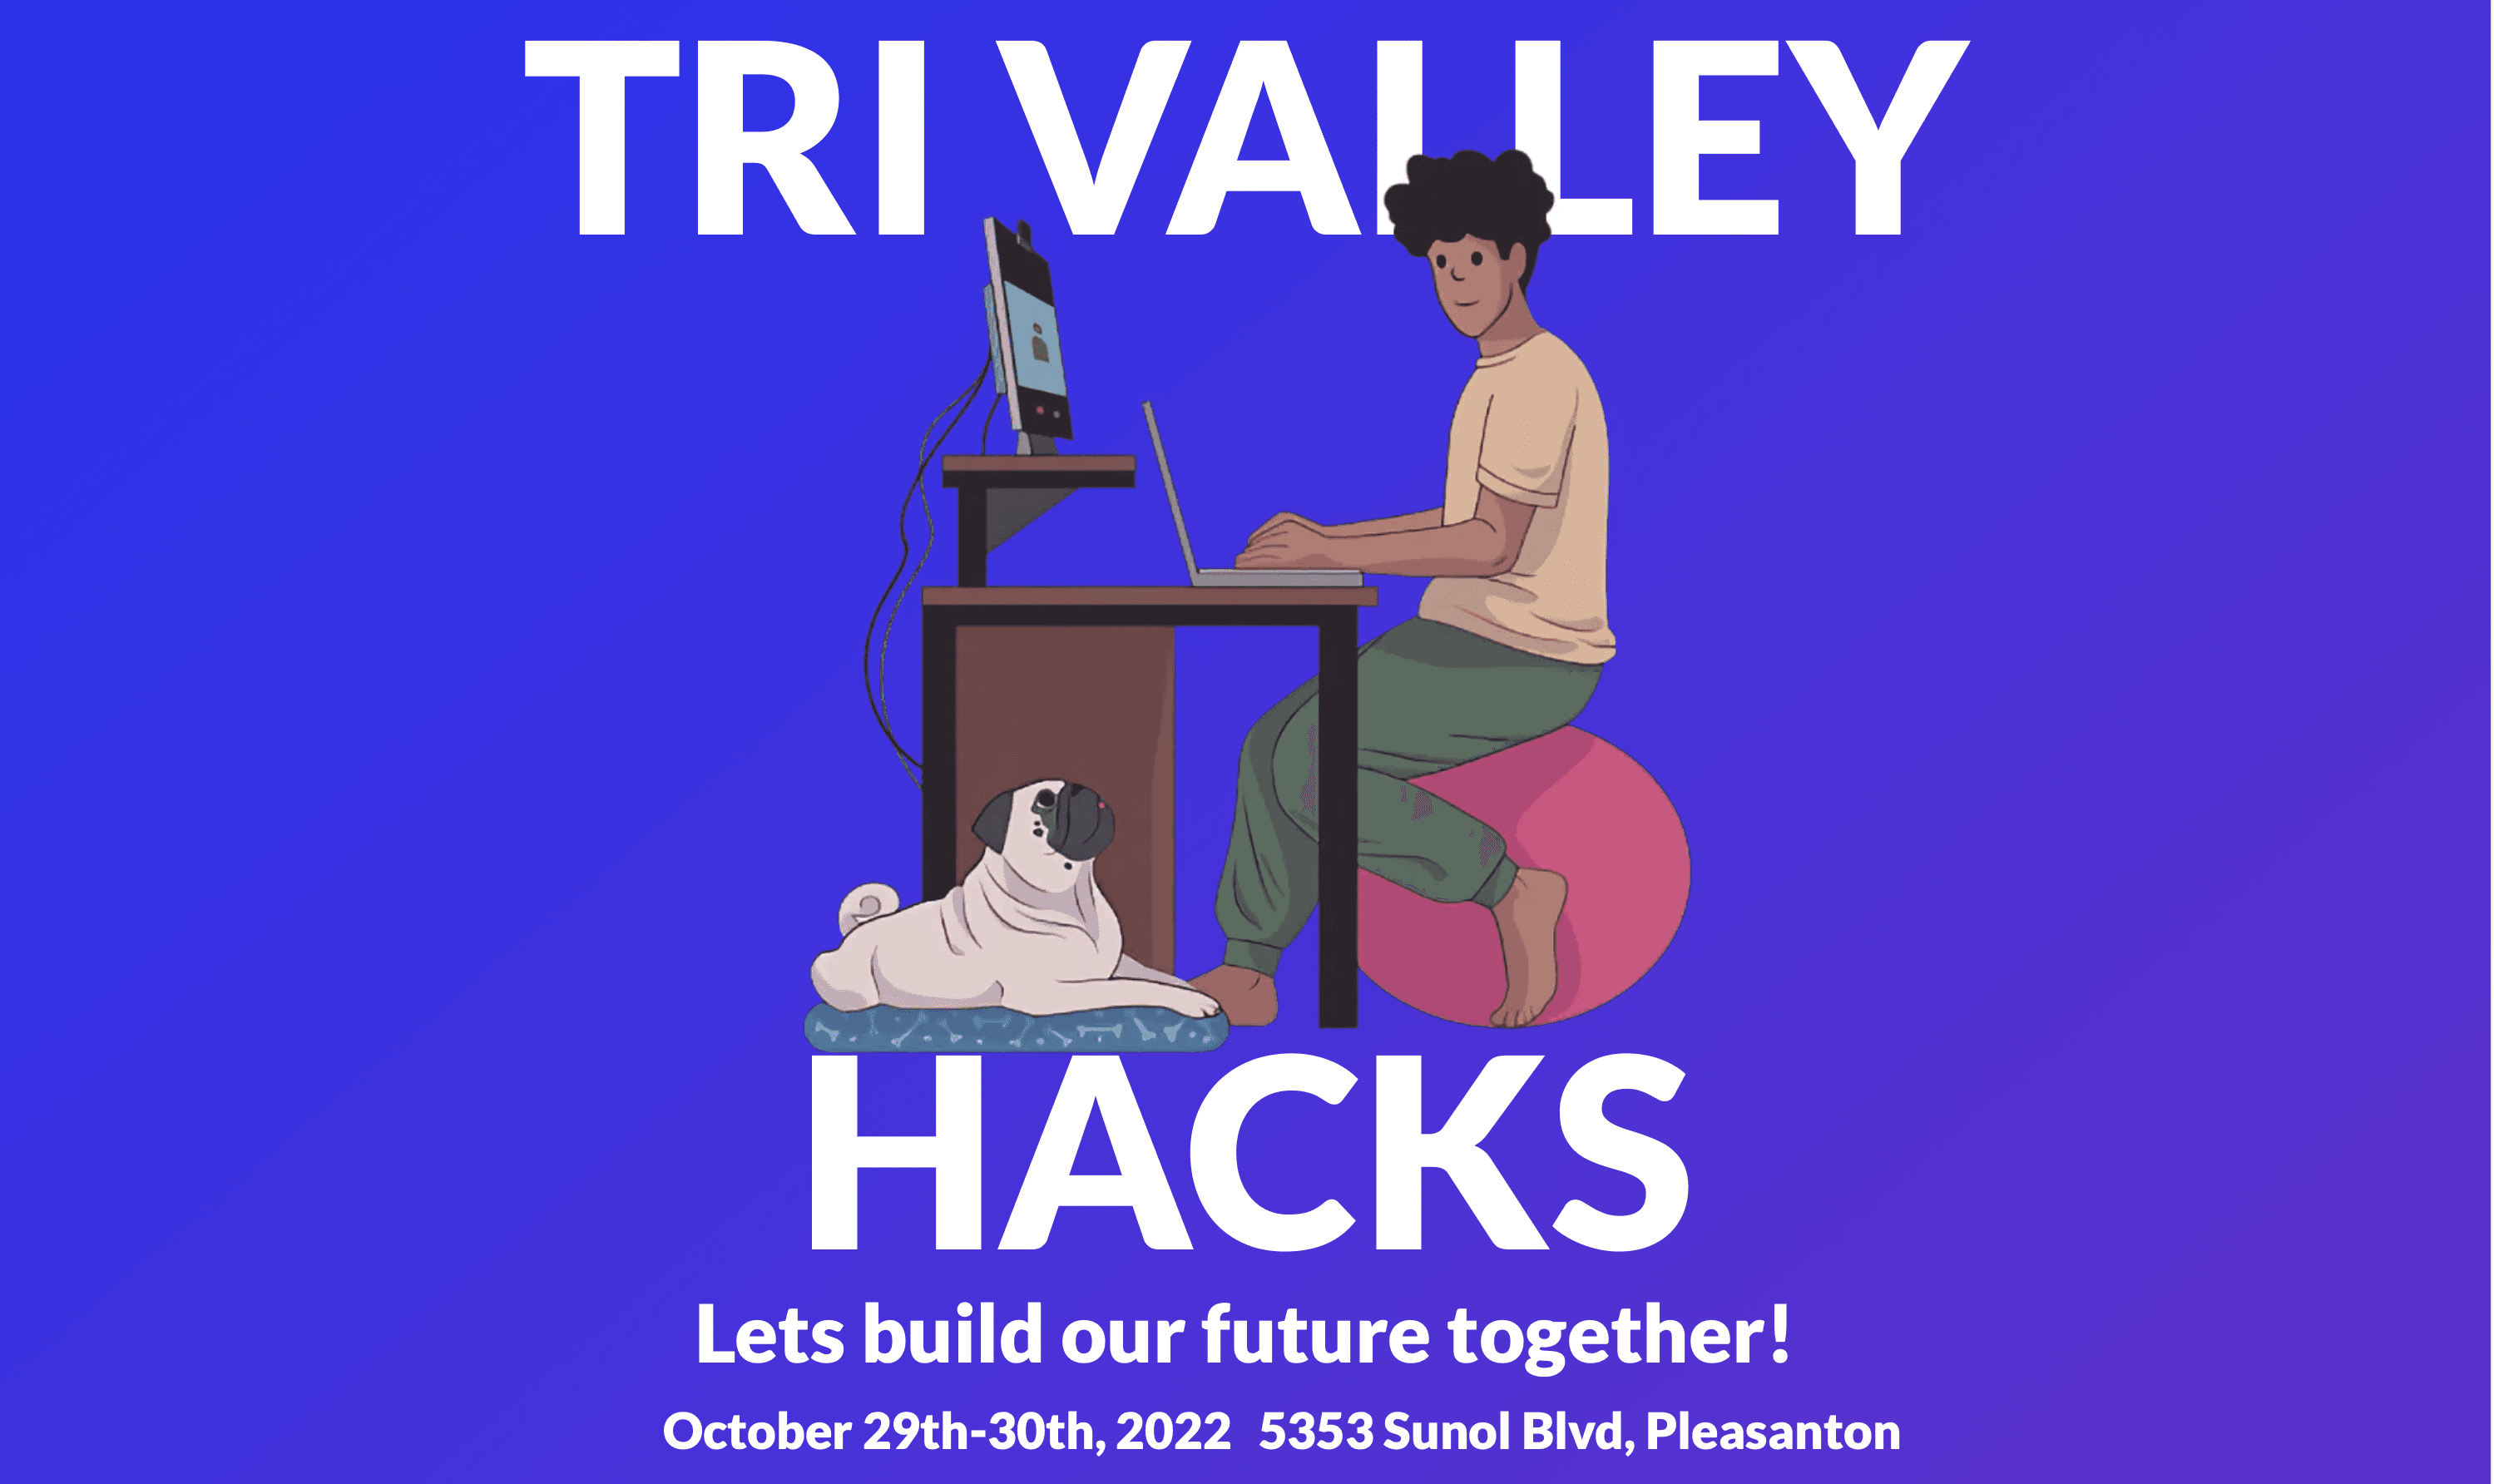 The homepage of trivalleyhacks.org